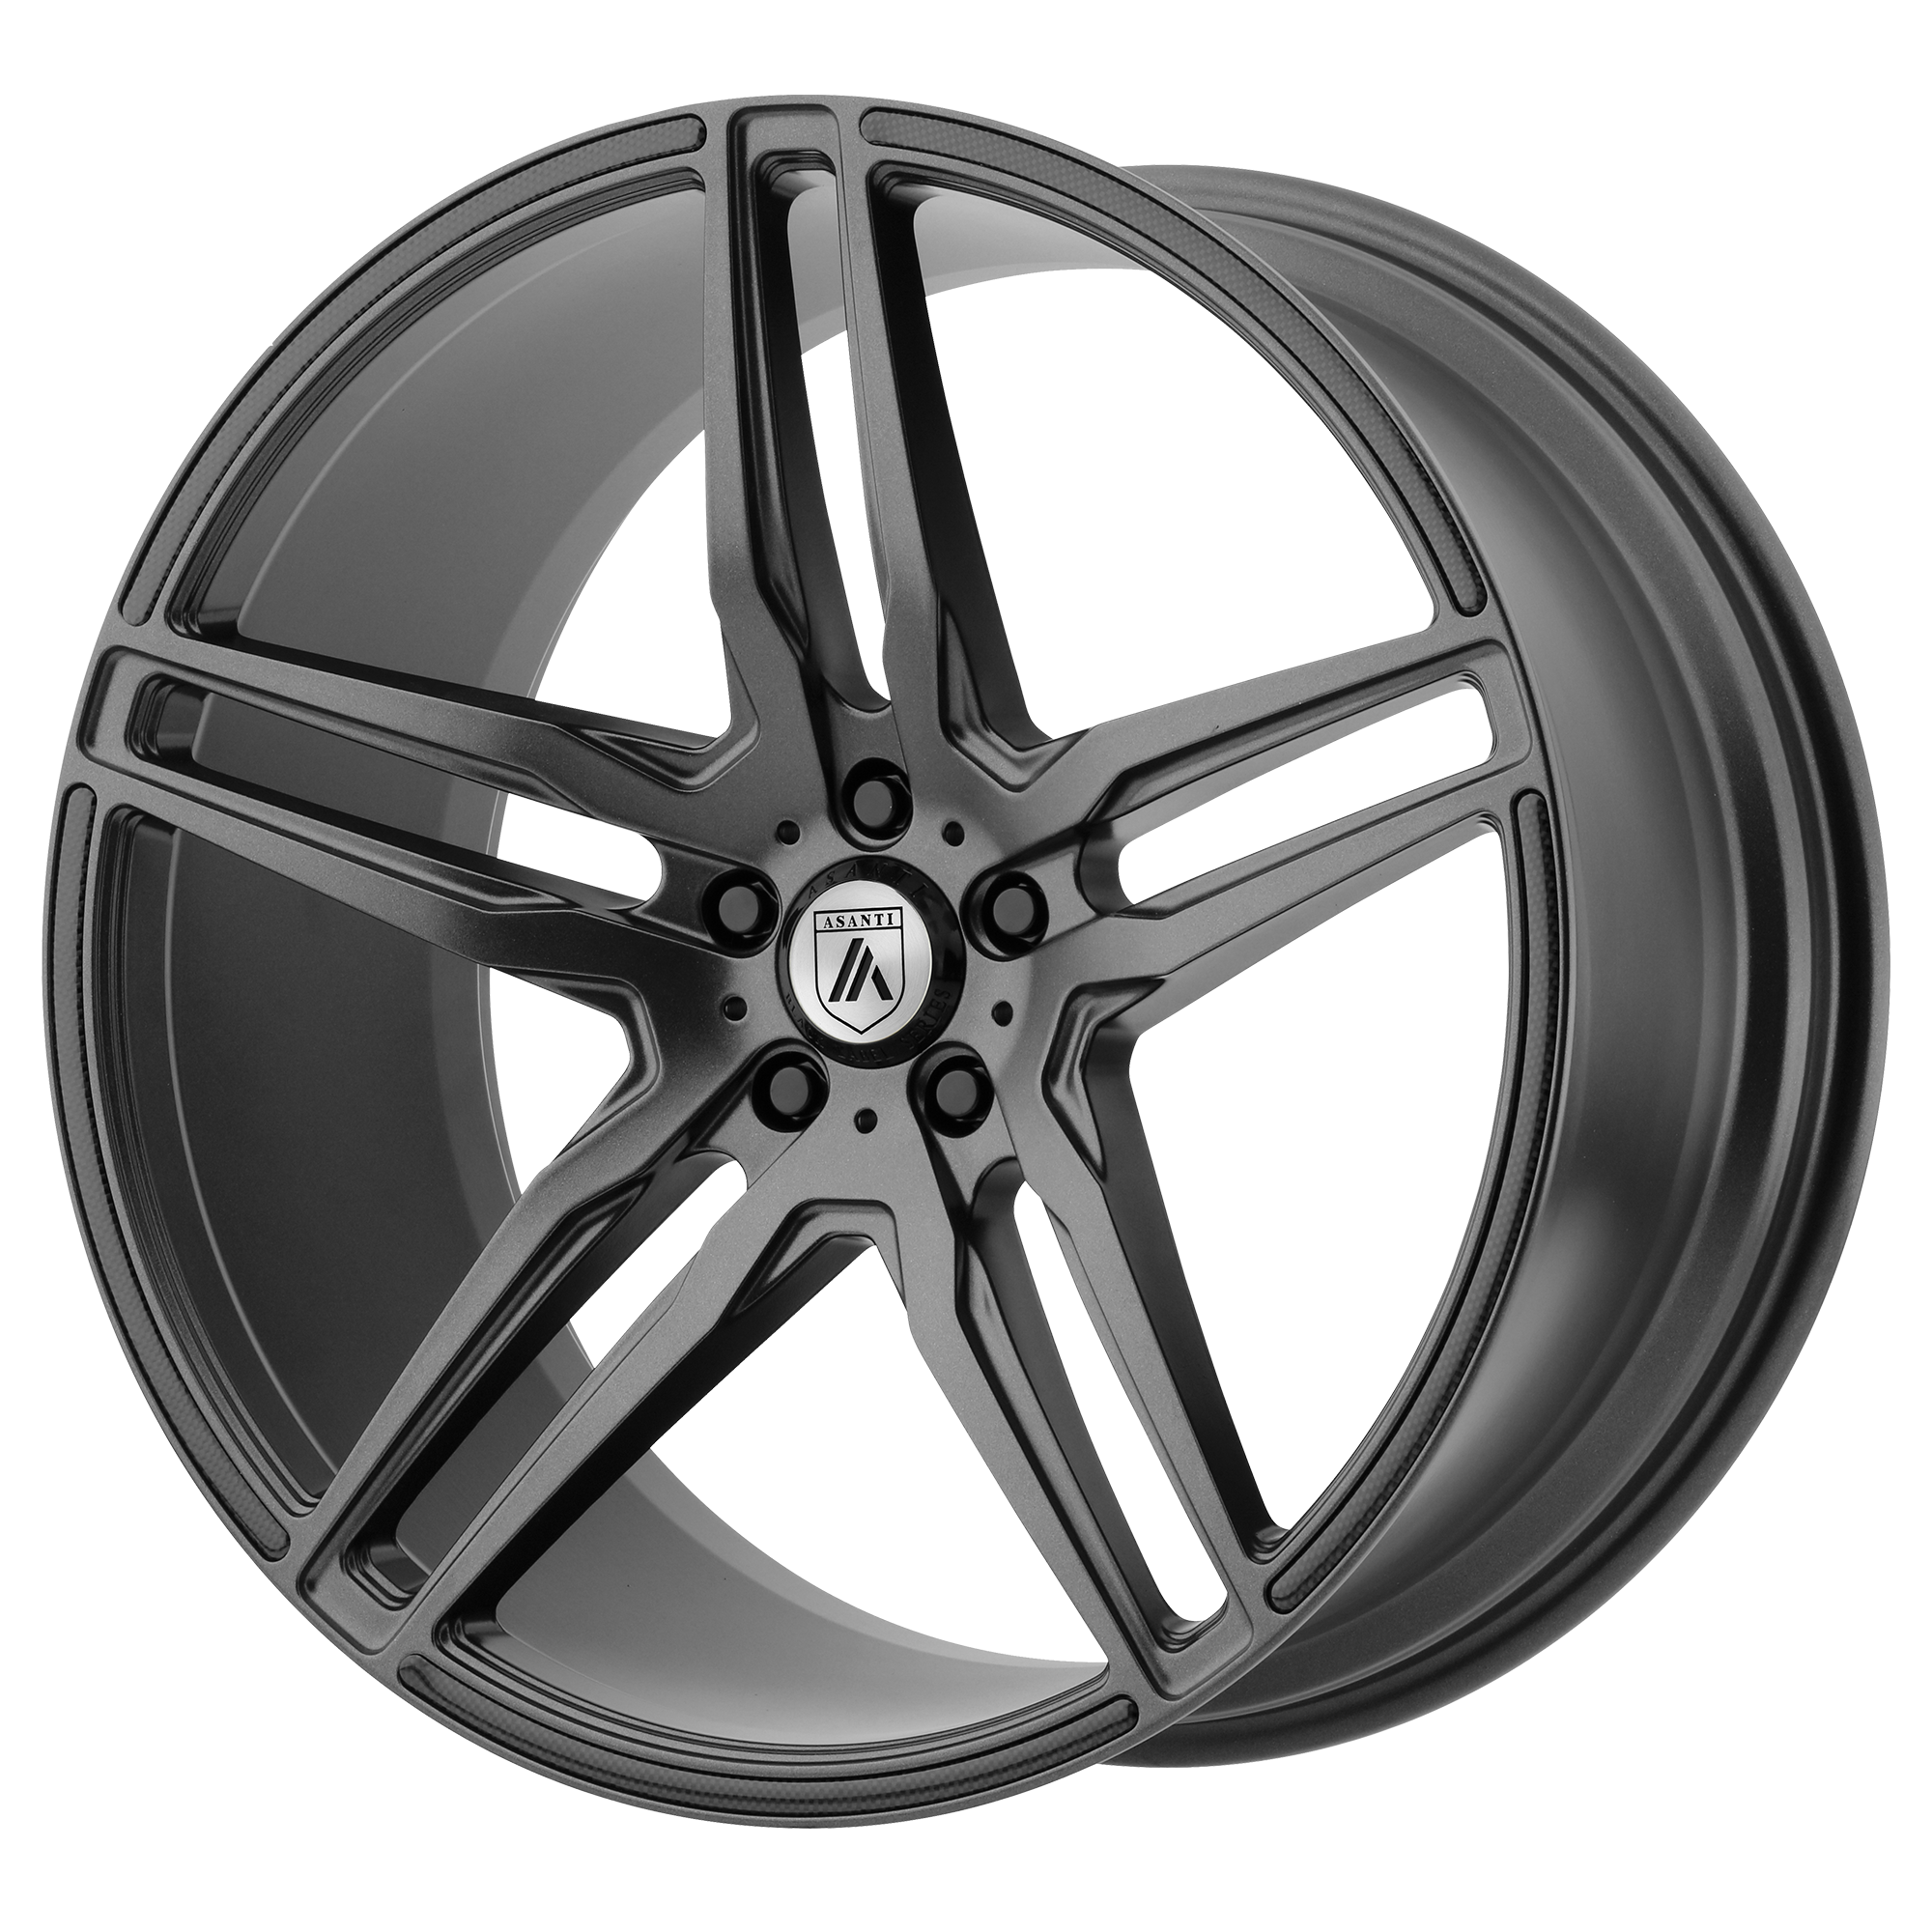 ORION 20x10.5 Blank MATTE GRAPHITE (38.00 - 45.00 mm) - Tires and Engine Performance